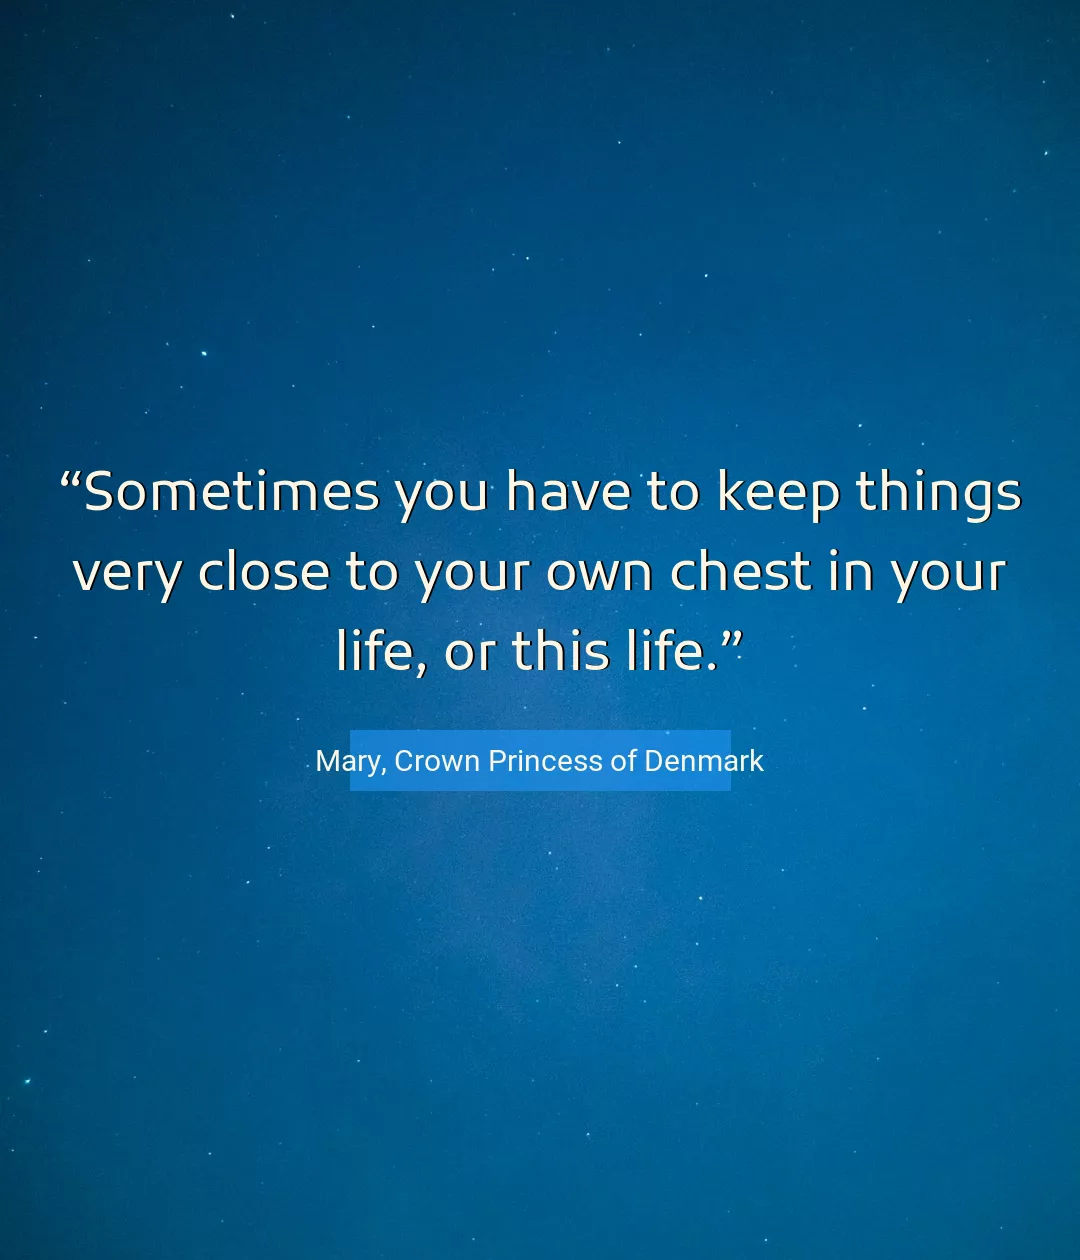 Quote About Life By Mary, Crown Princess of Denmark